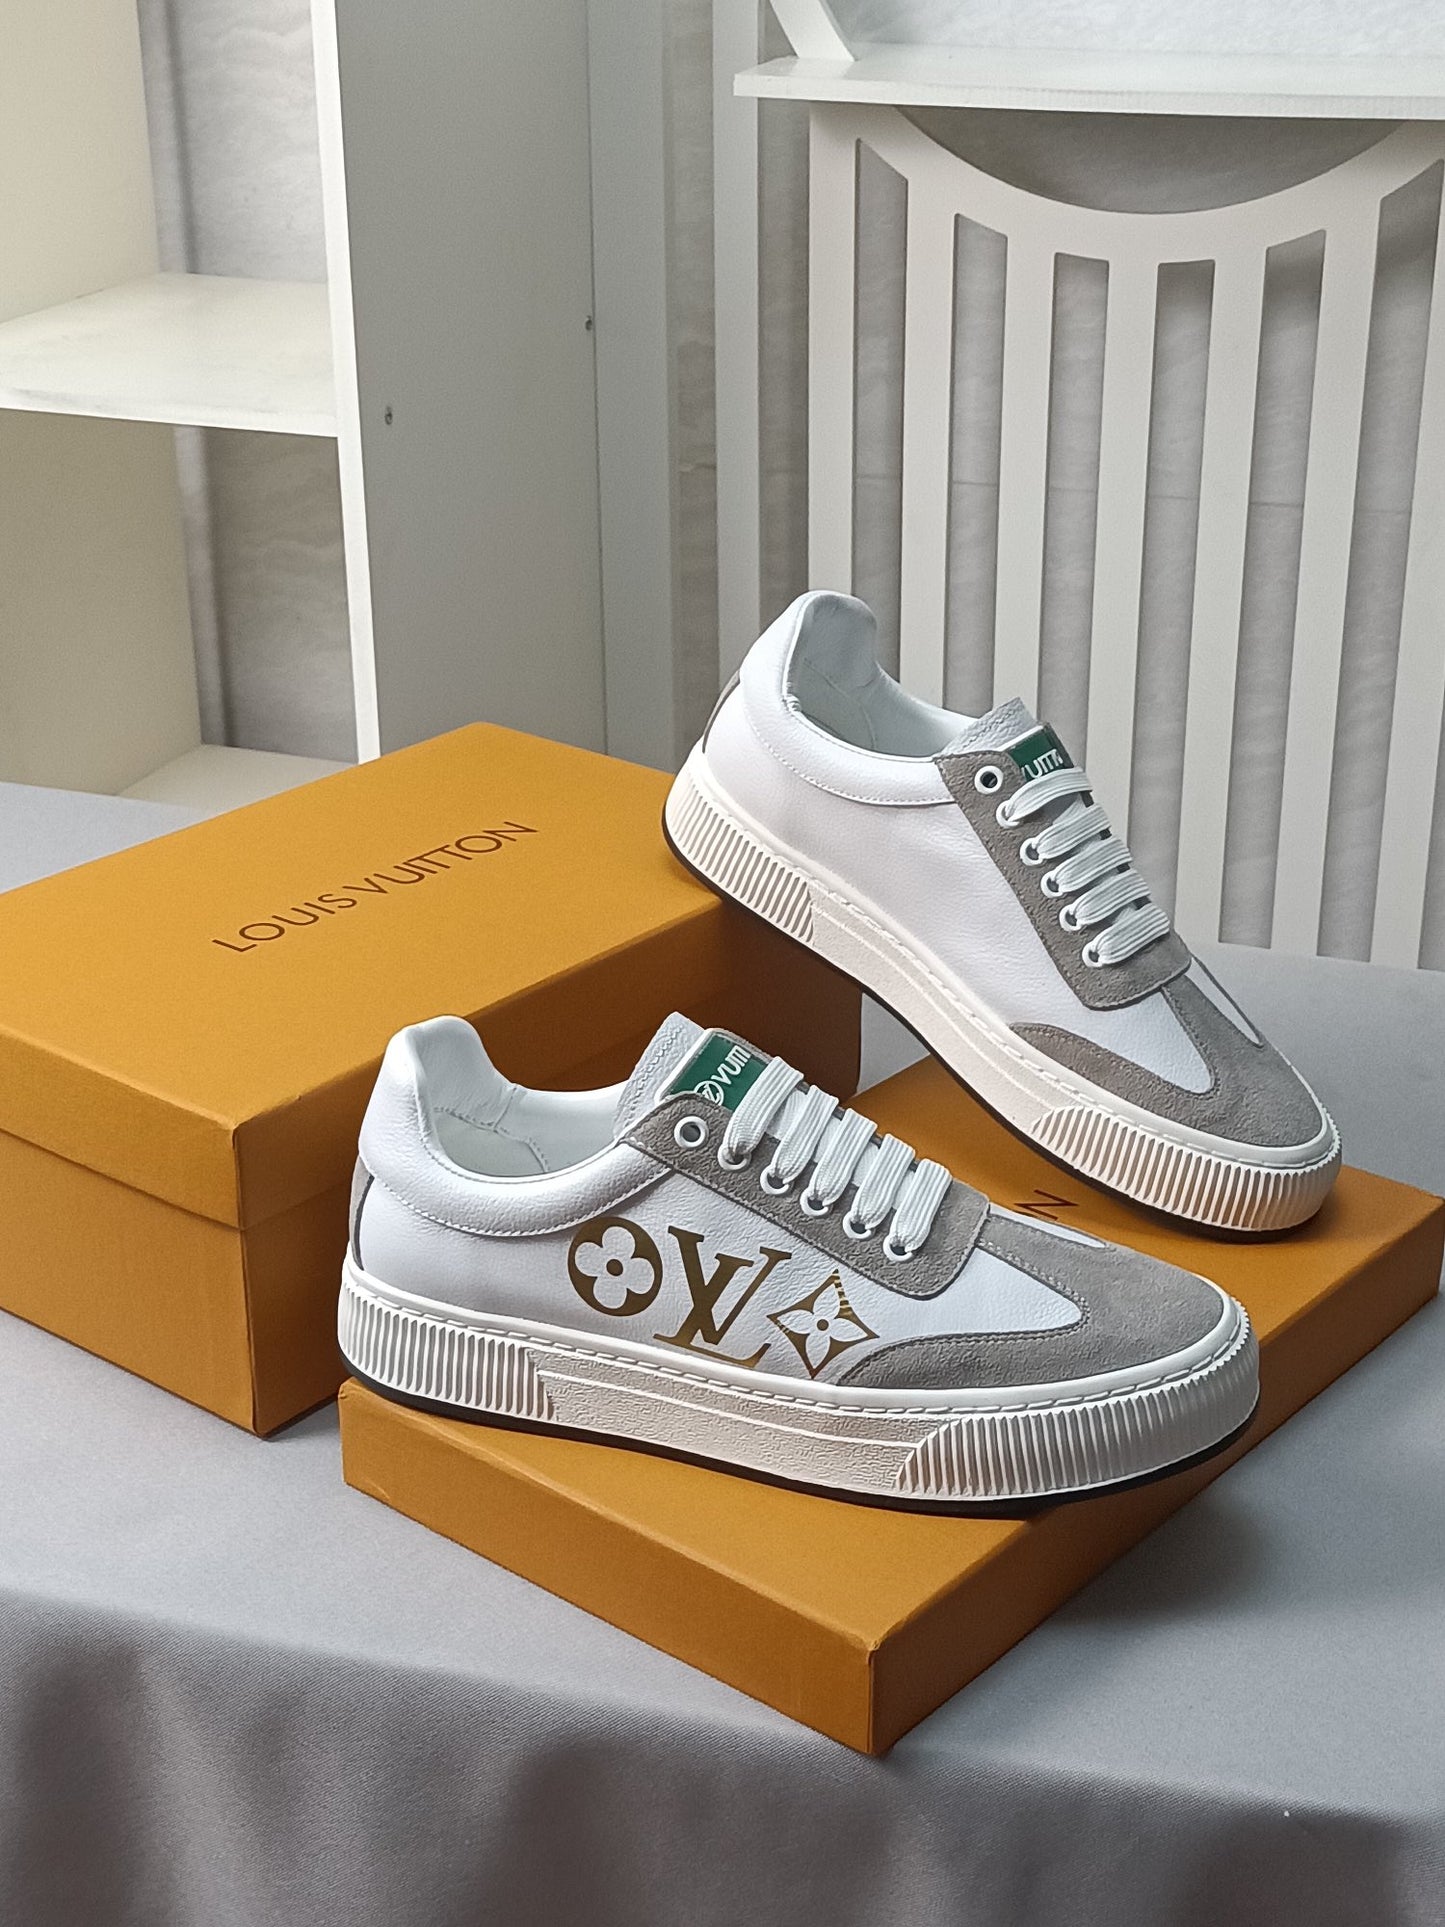 LOUIS VUITTON TRAINER LOW GOLD GRAY